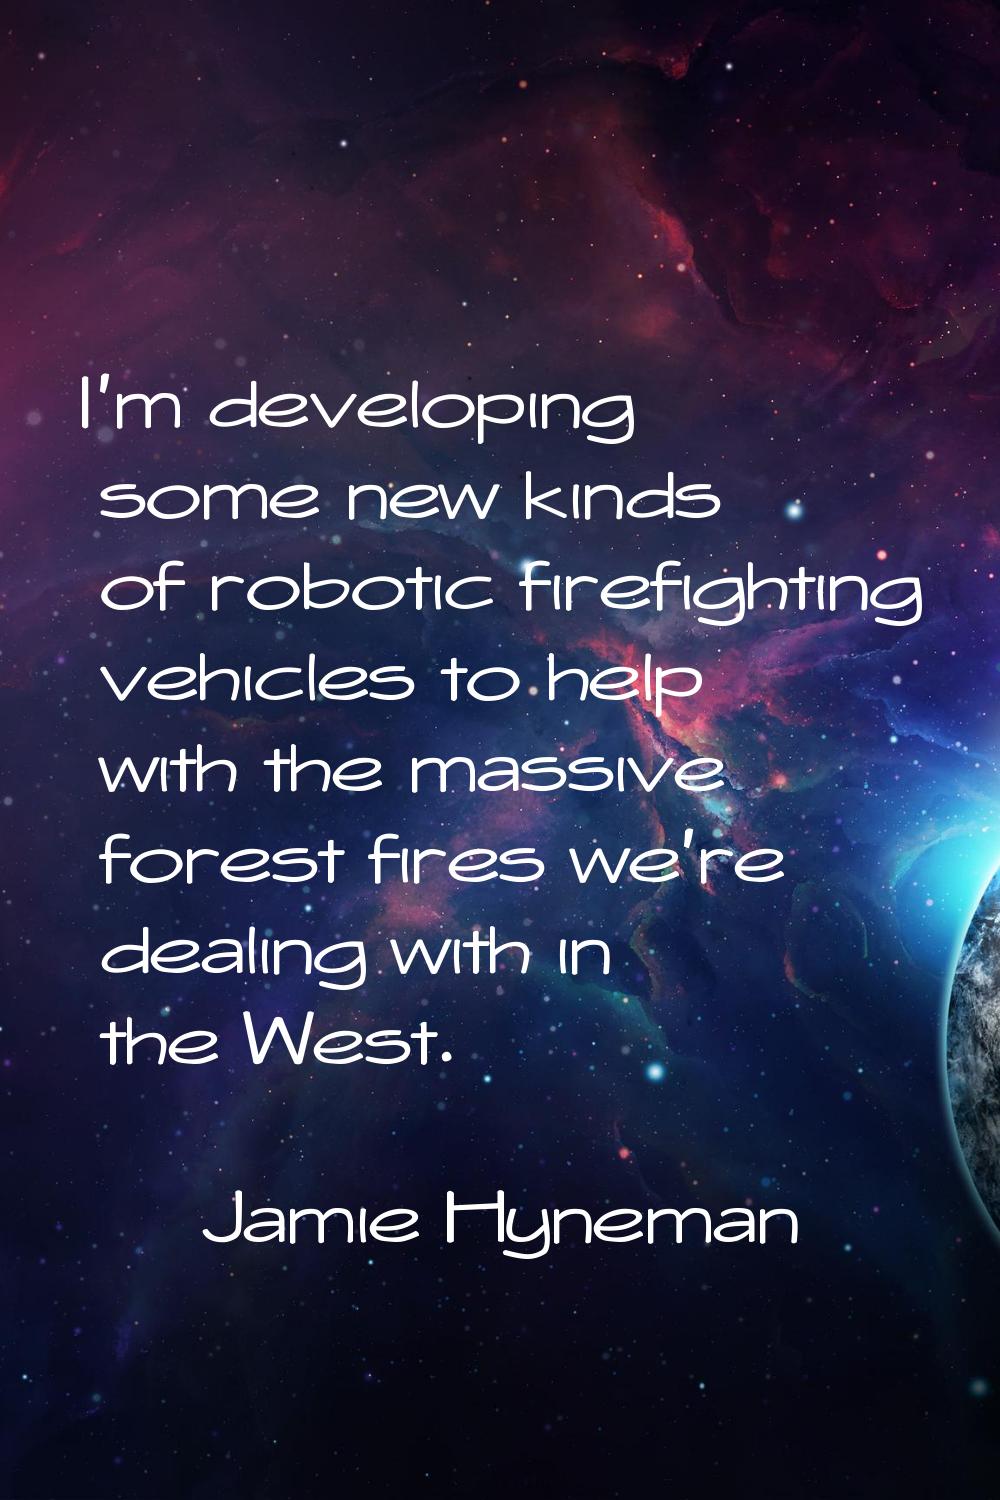 I'm developing some new kinds of robotic firefighting vehicles to help with the massive forest fire